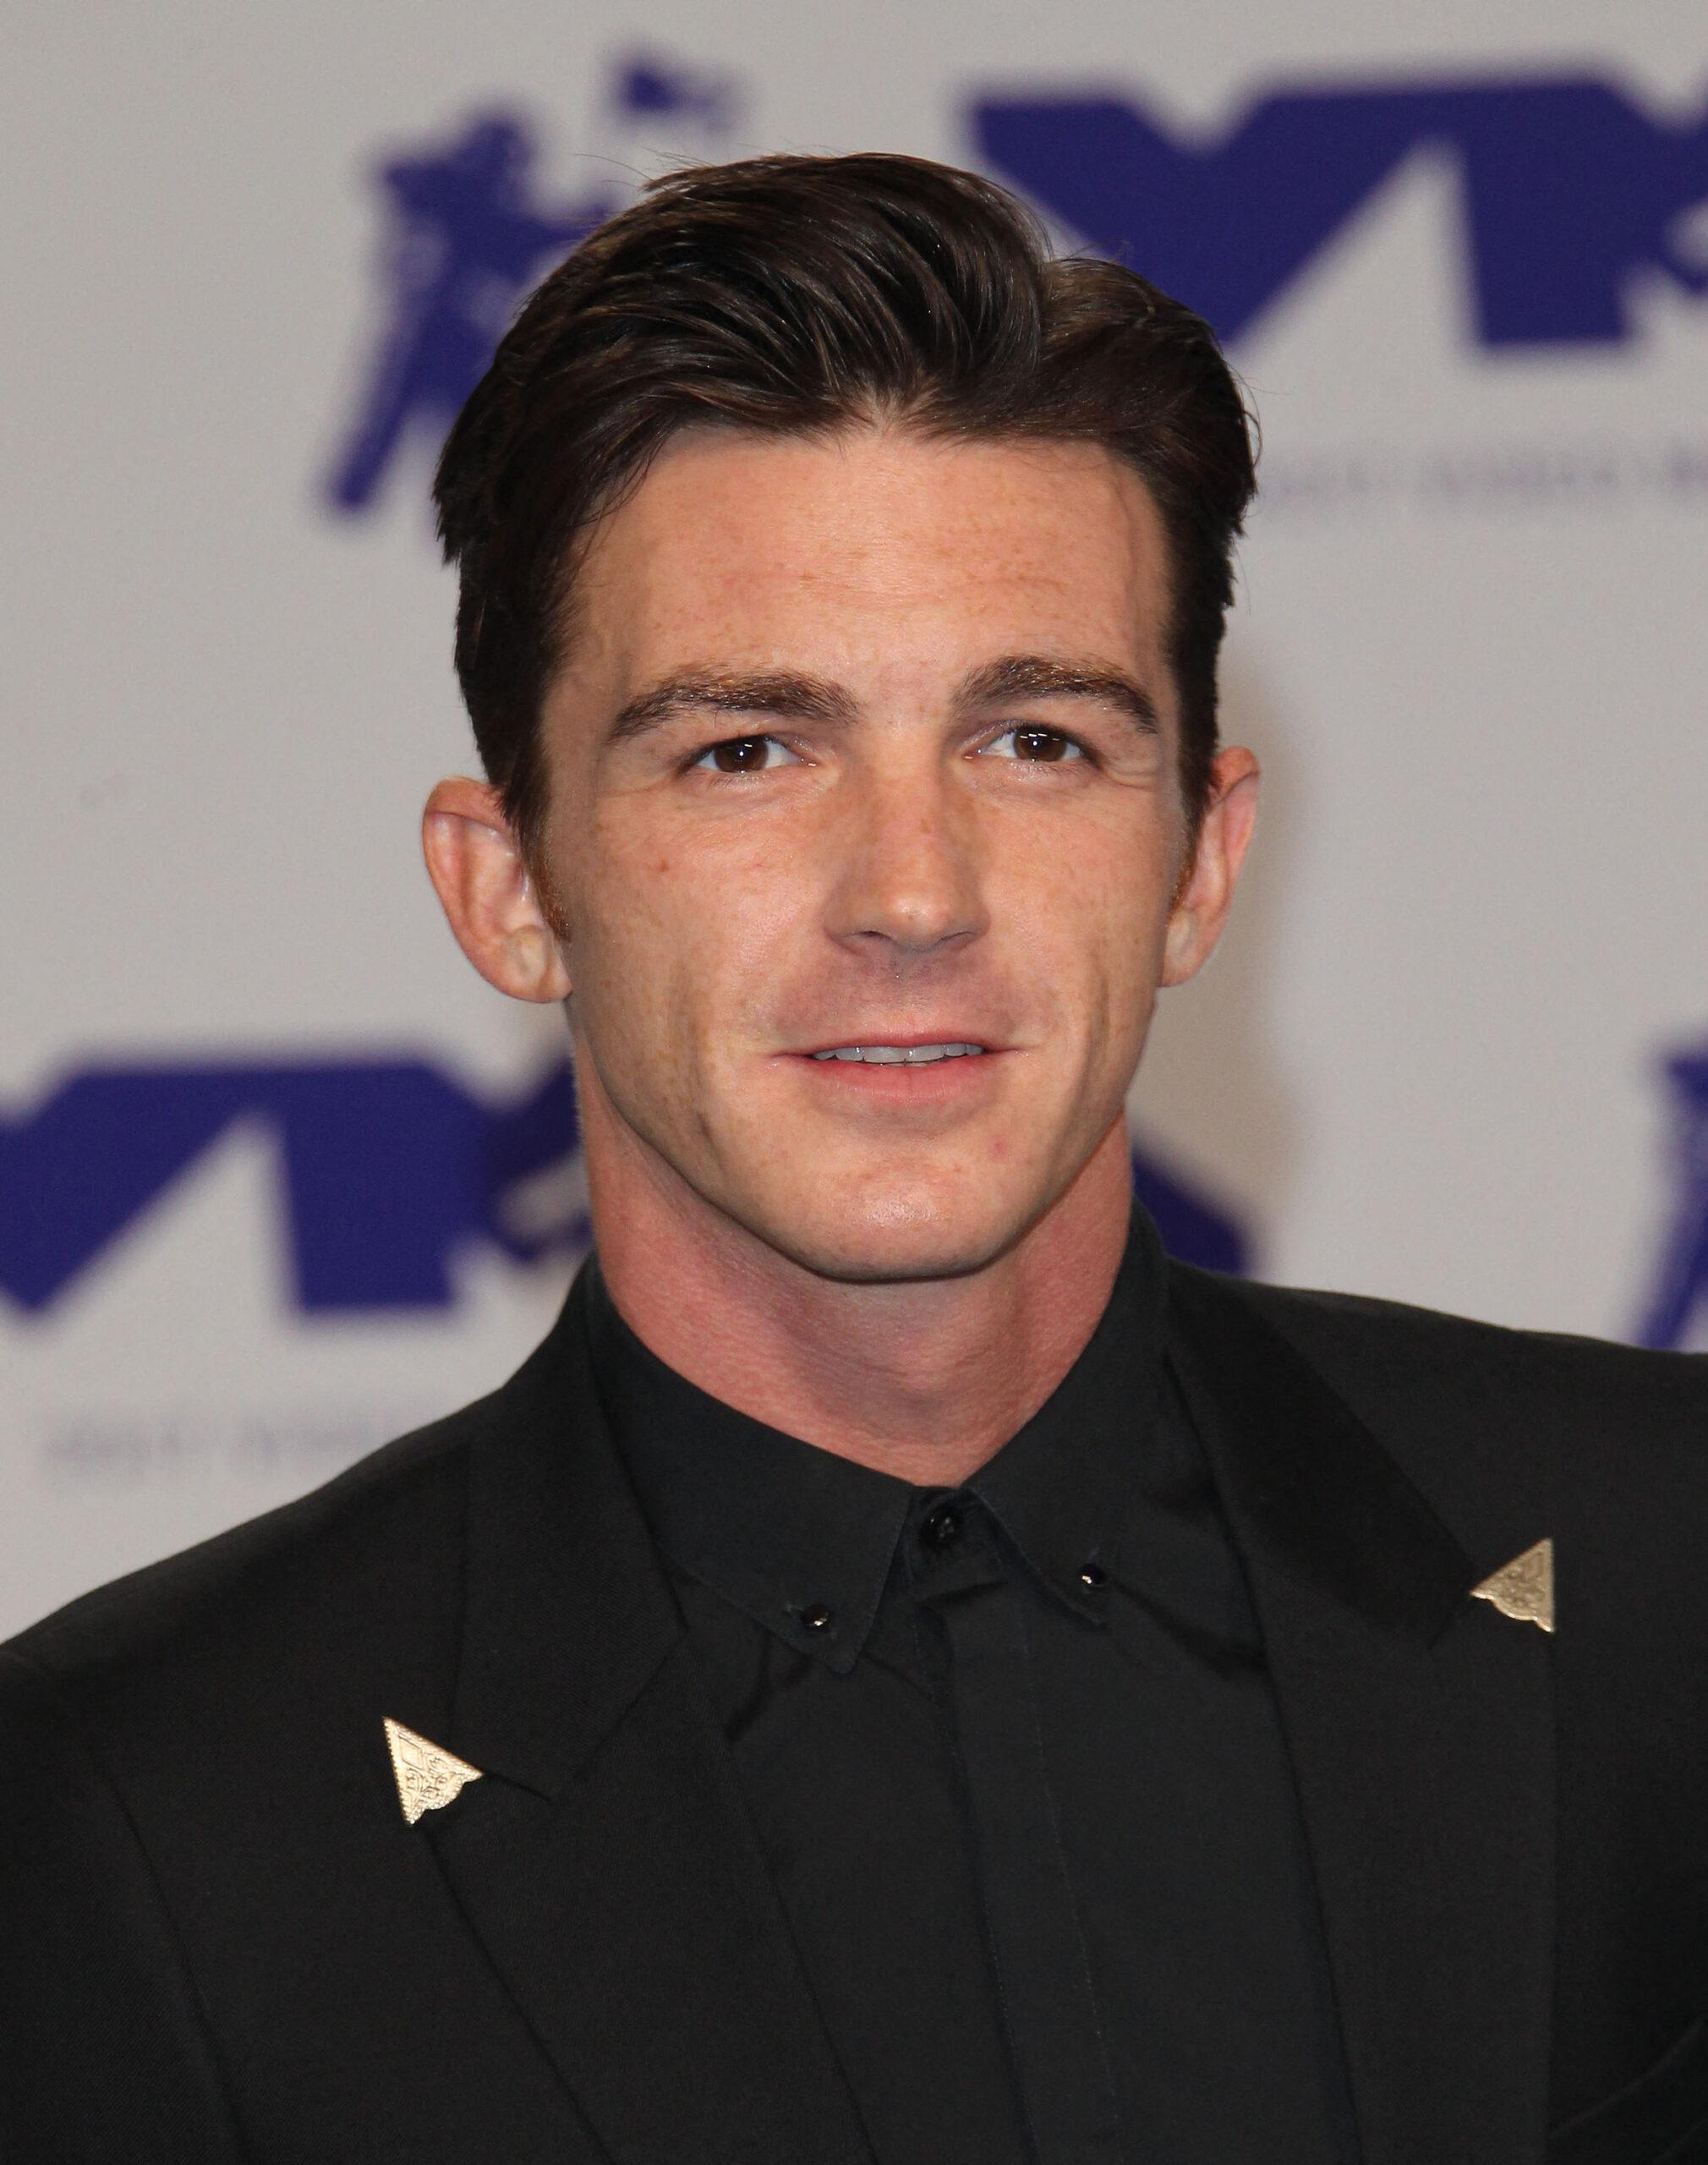 'Come Back Era': Drake Bell's Major Career Move After Brian Peck Abuse Allegations